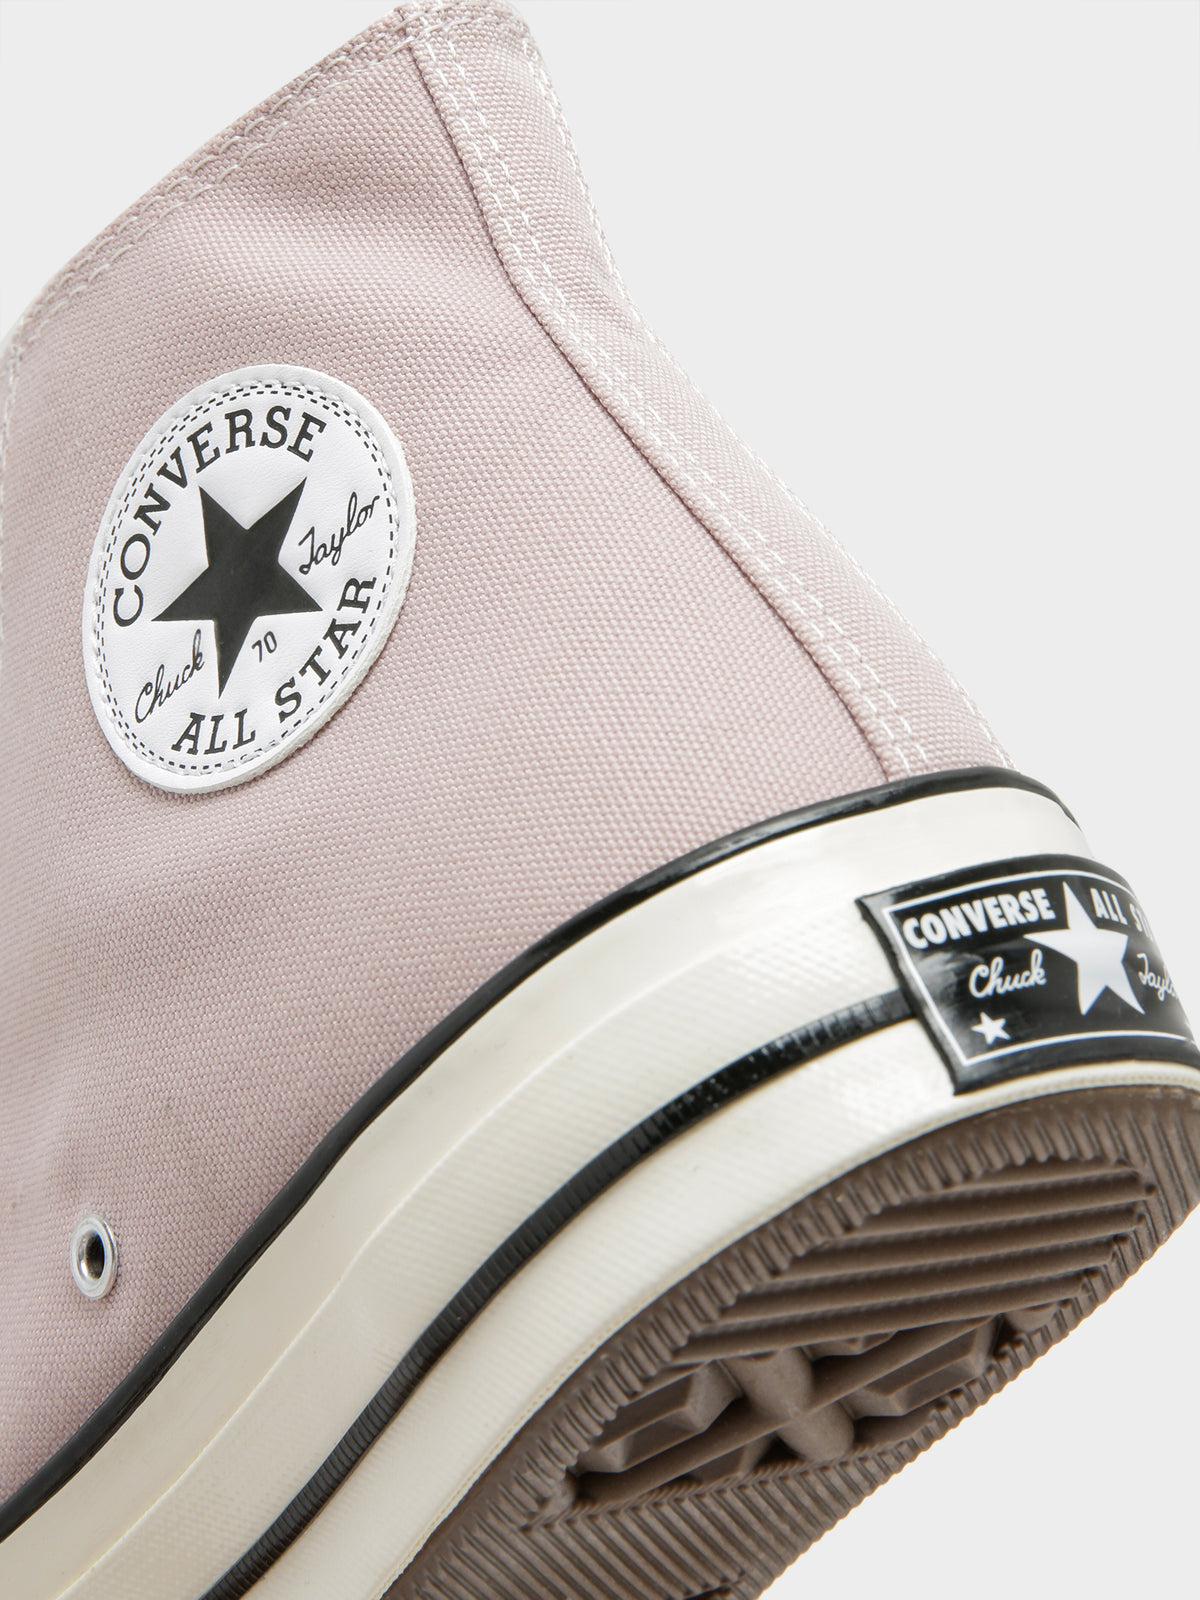 Unisex Chuck 70 High Sneakers in Mauve